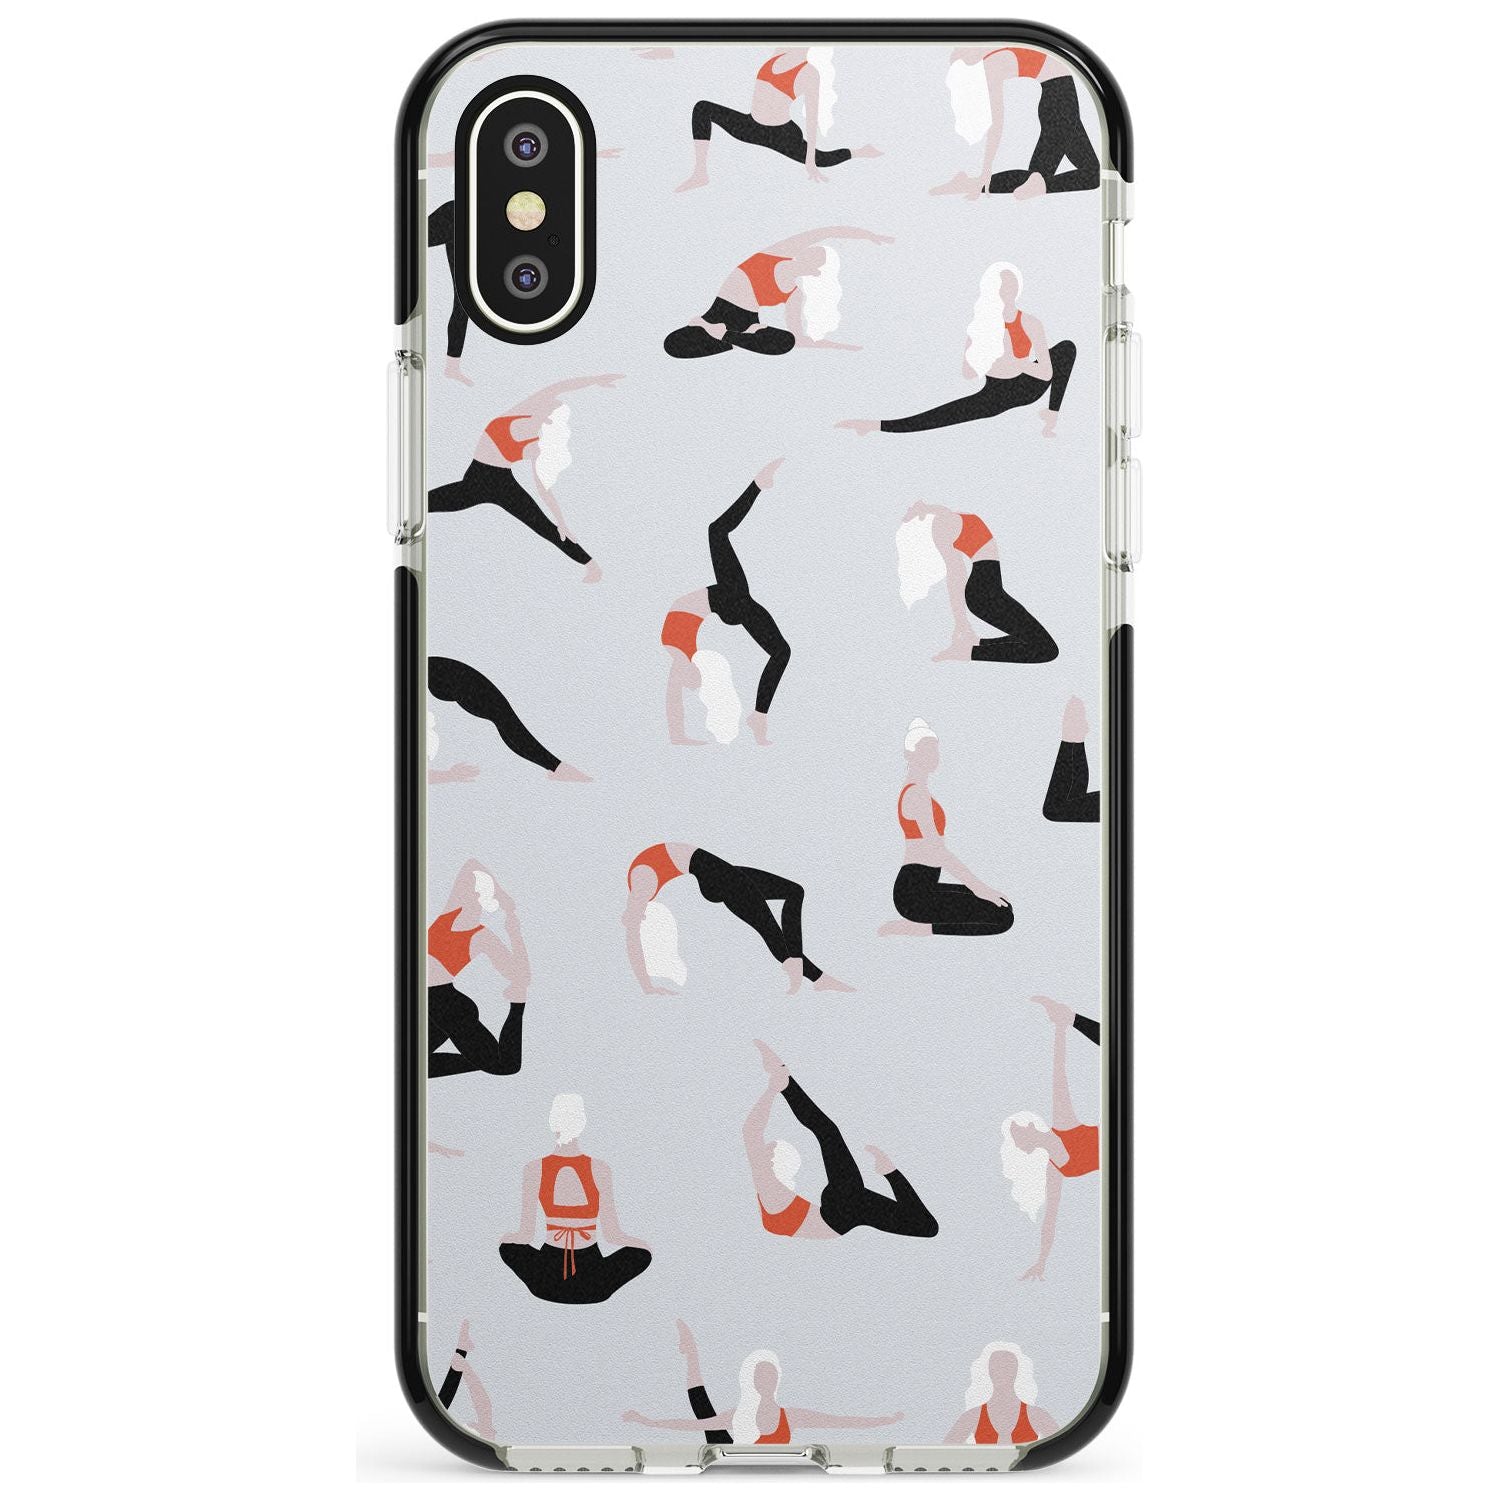 Yoga Poses Pink Fade Impact Phone Case for iPhone X XS Max XR